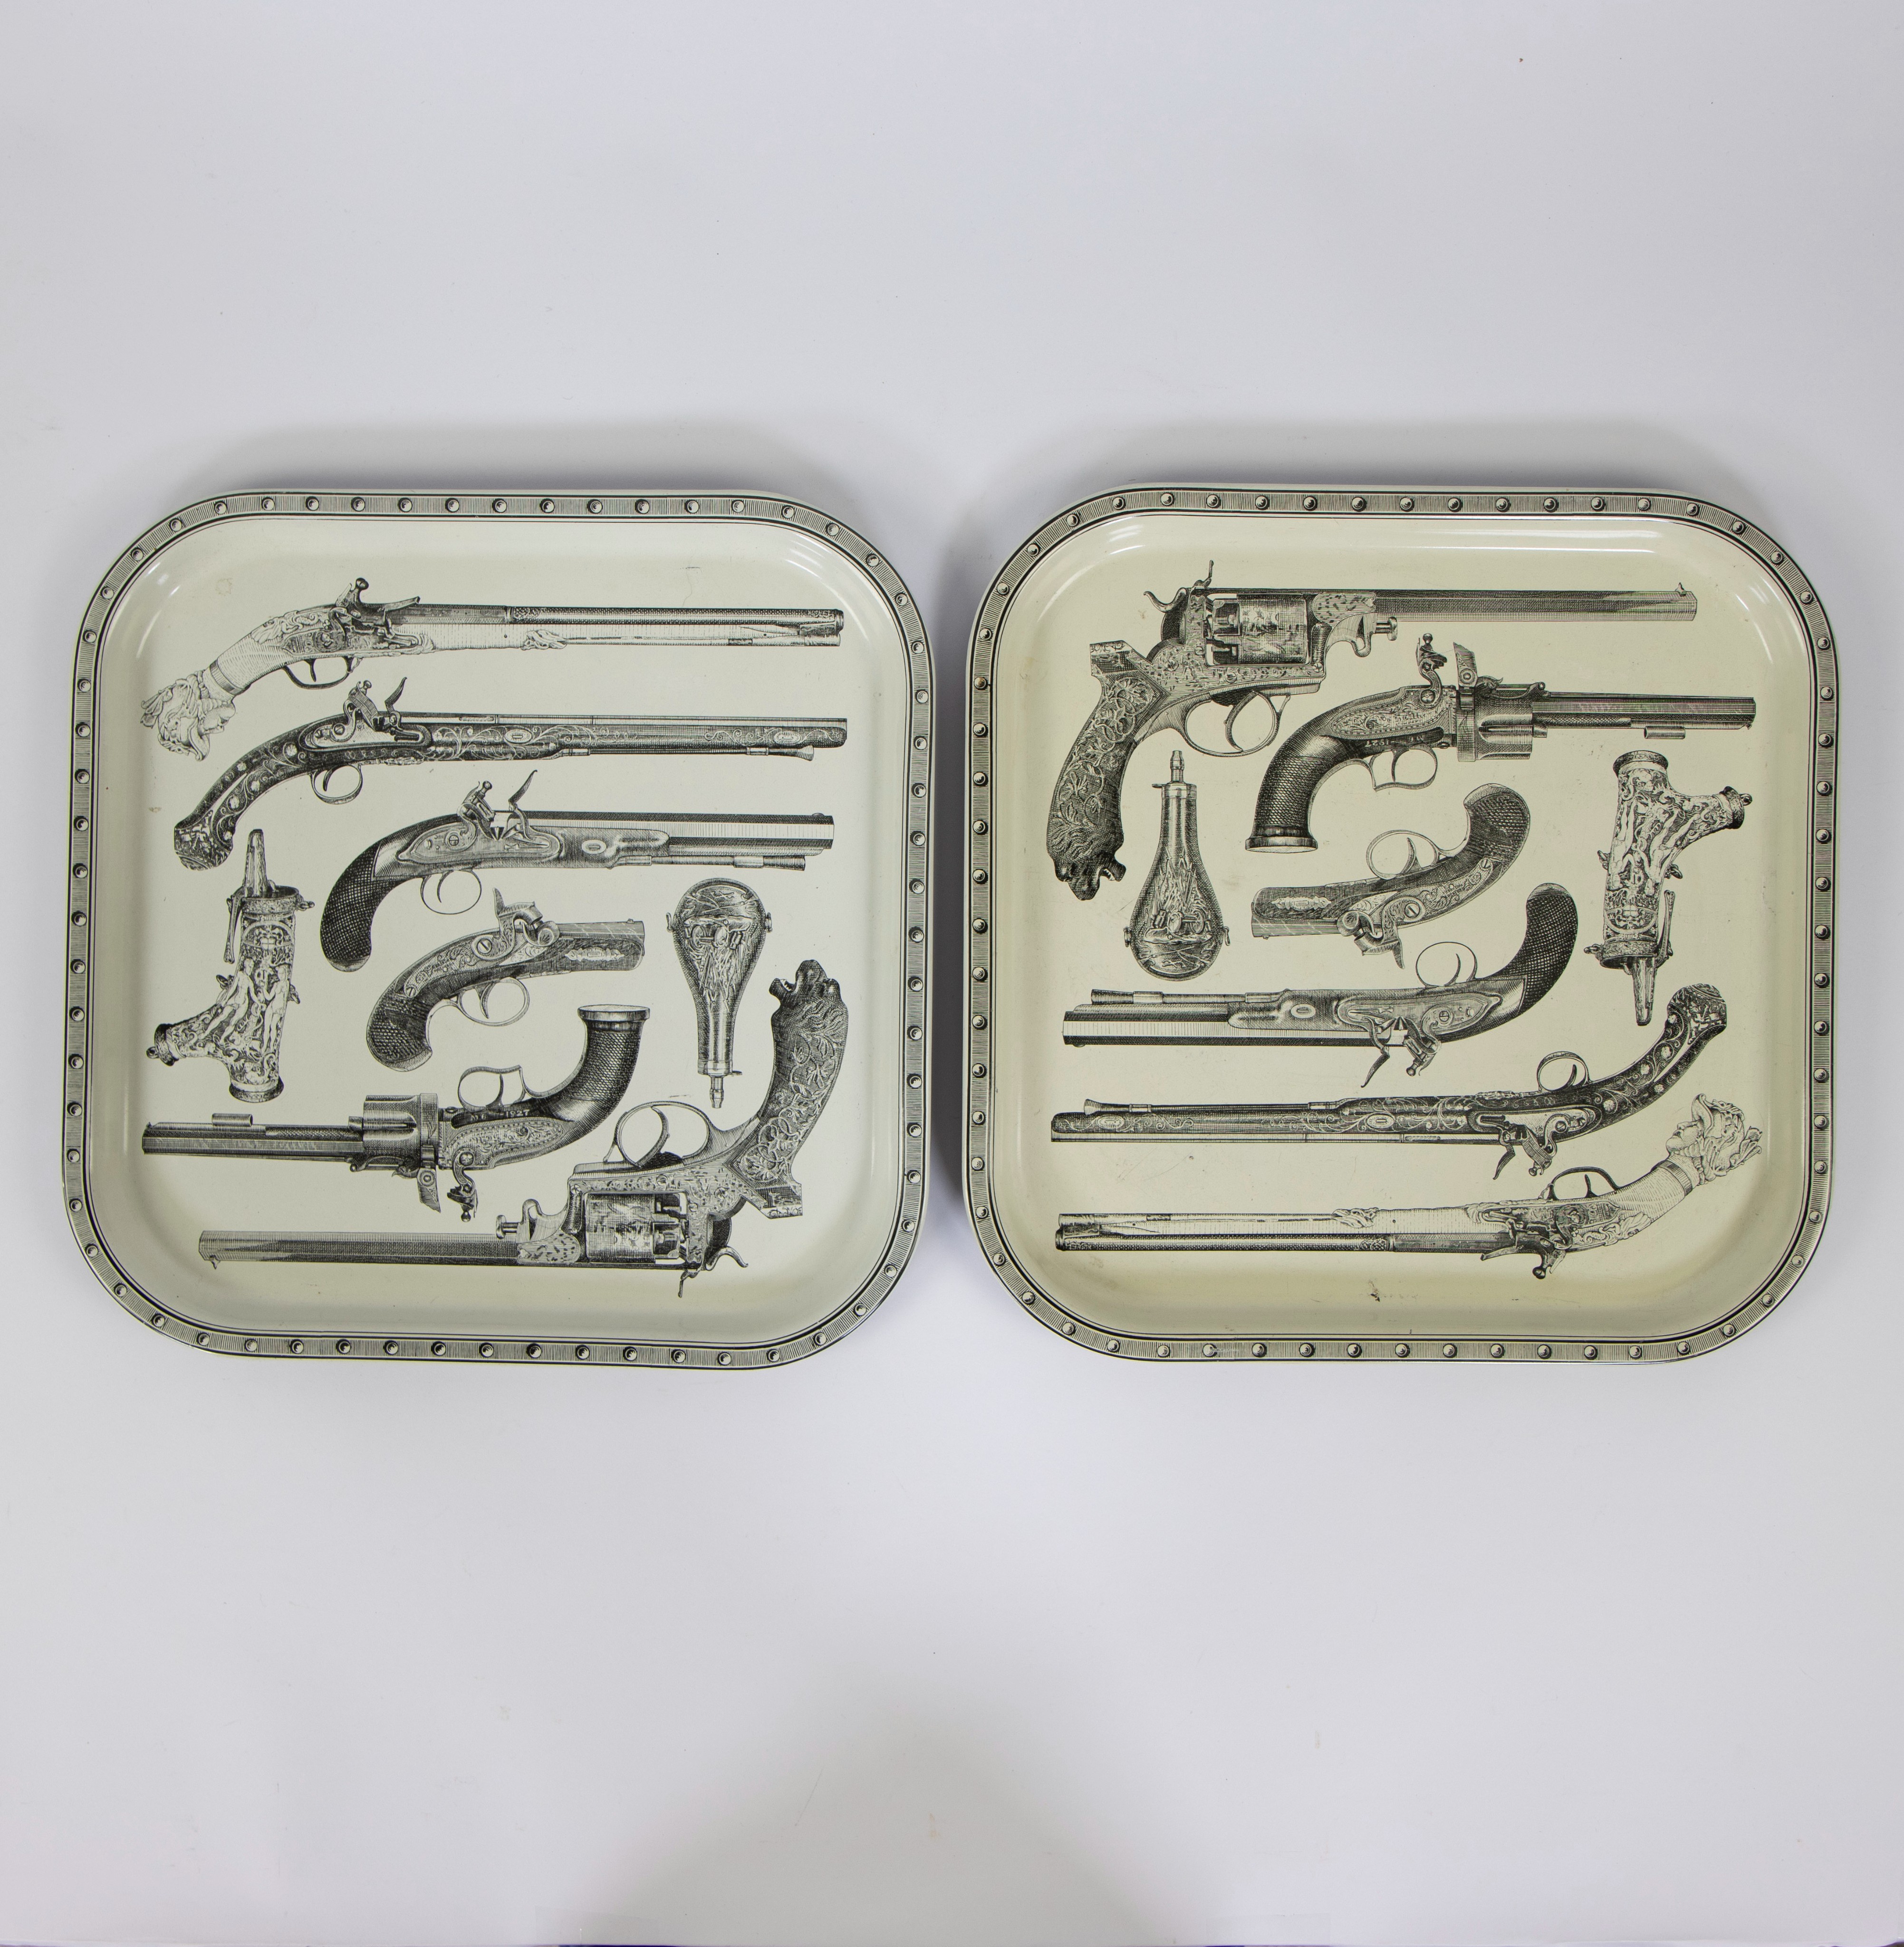 Two beautiful serving trays made of metal, with nice pistol and guns pattern. From the 1960s, unmark